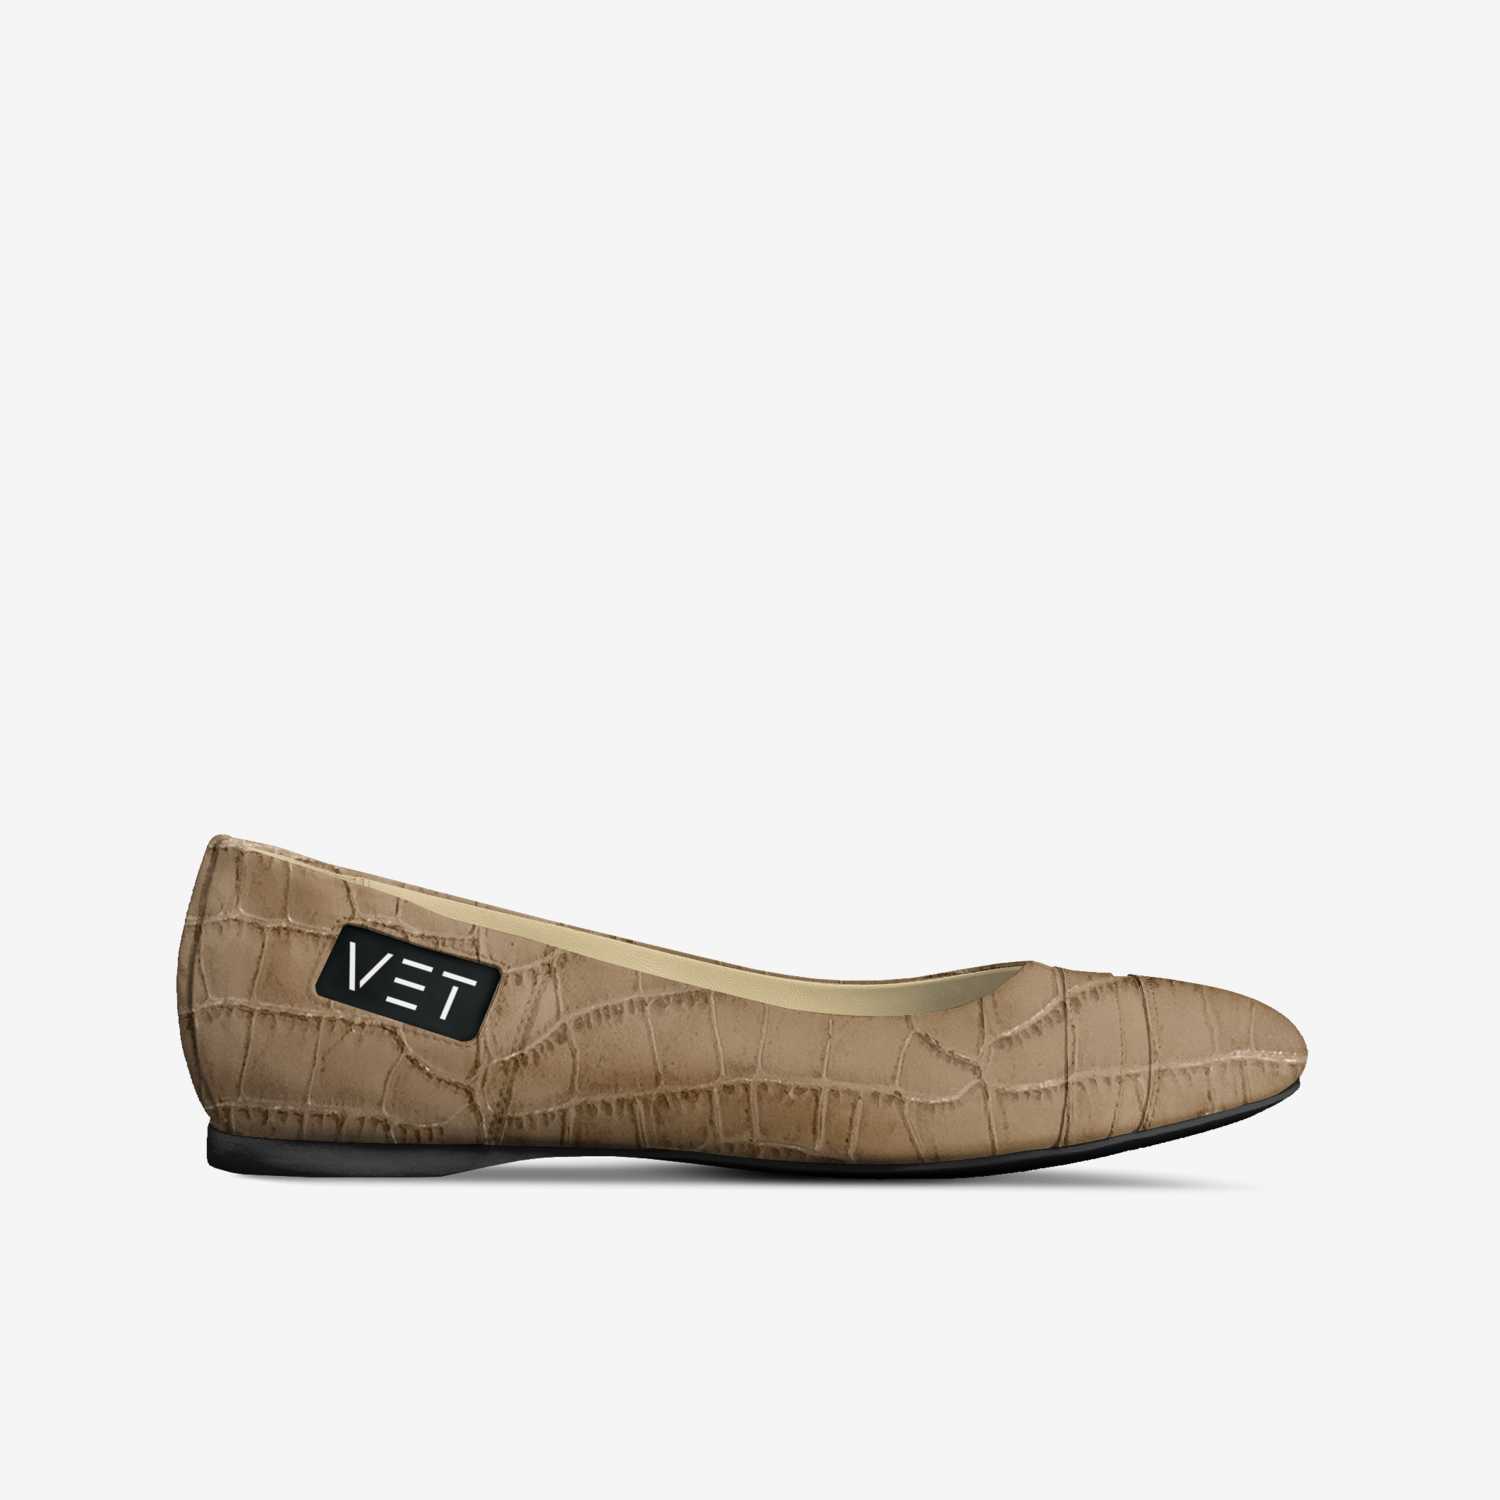 VETfab 2 custom made in Italy shoes by Desi Shedrick | Side view